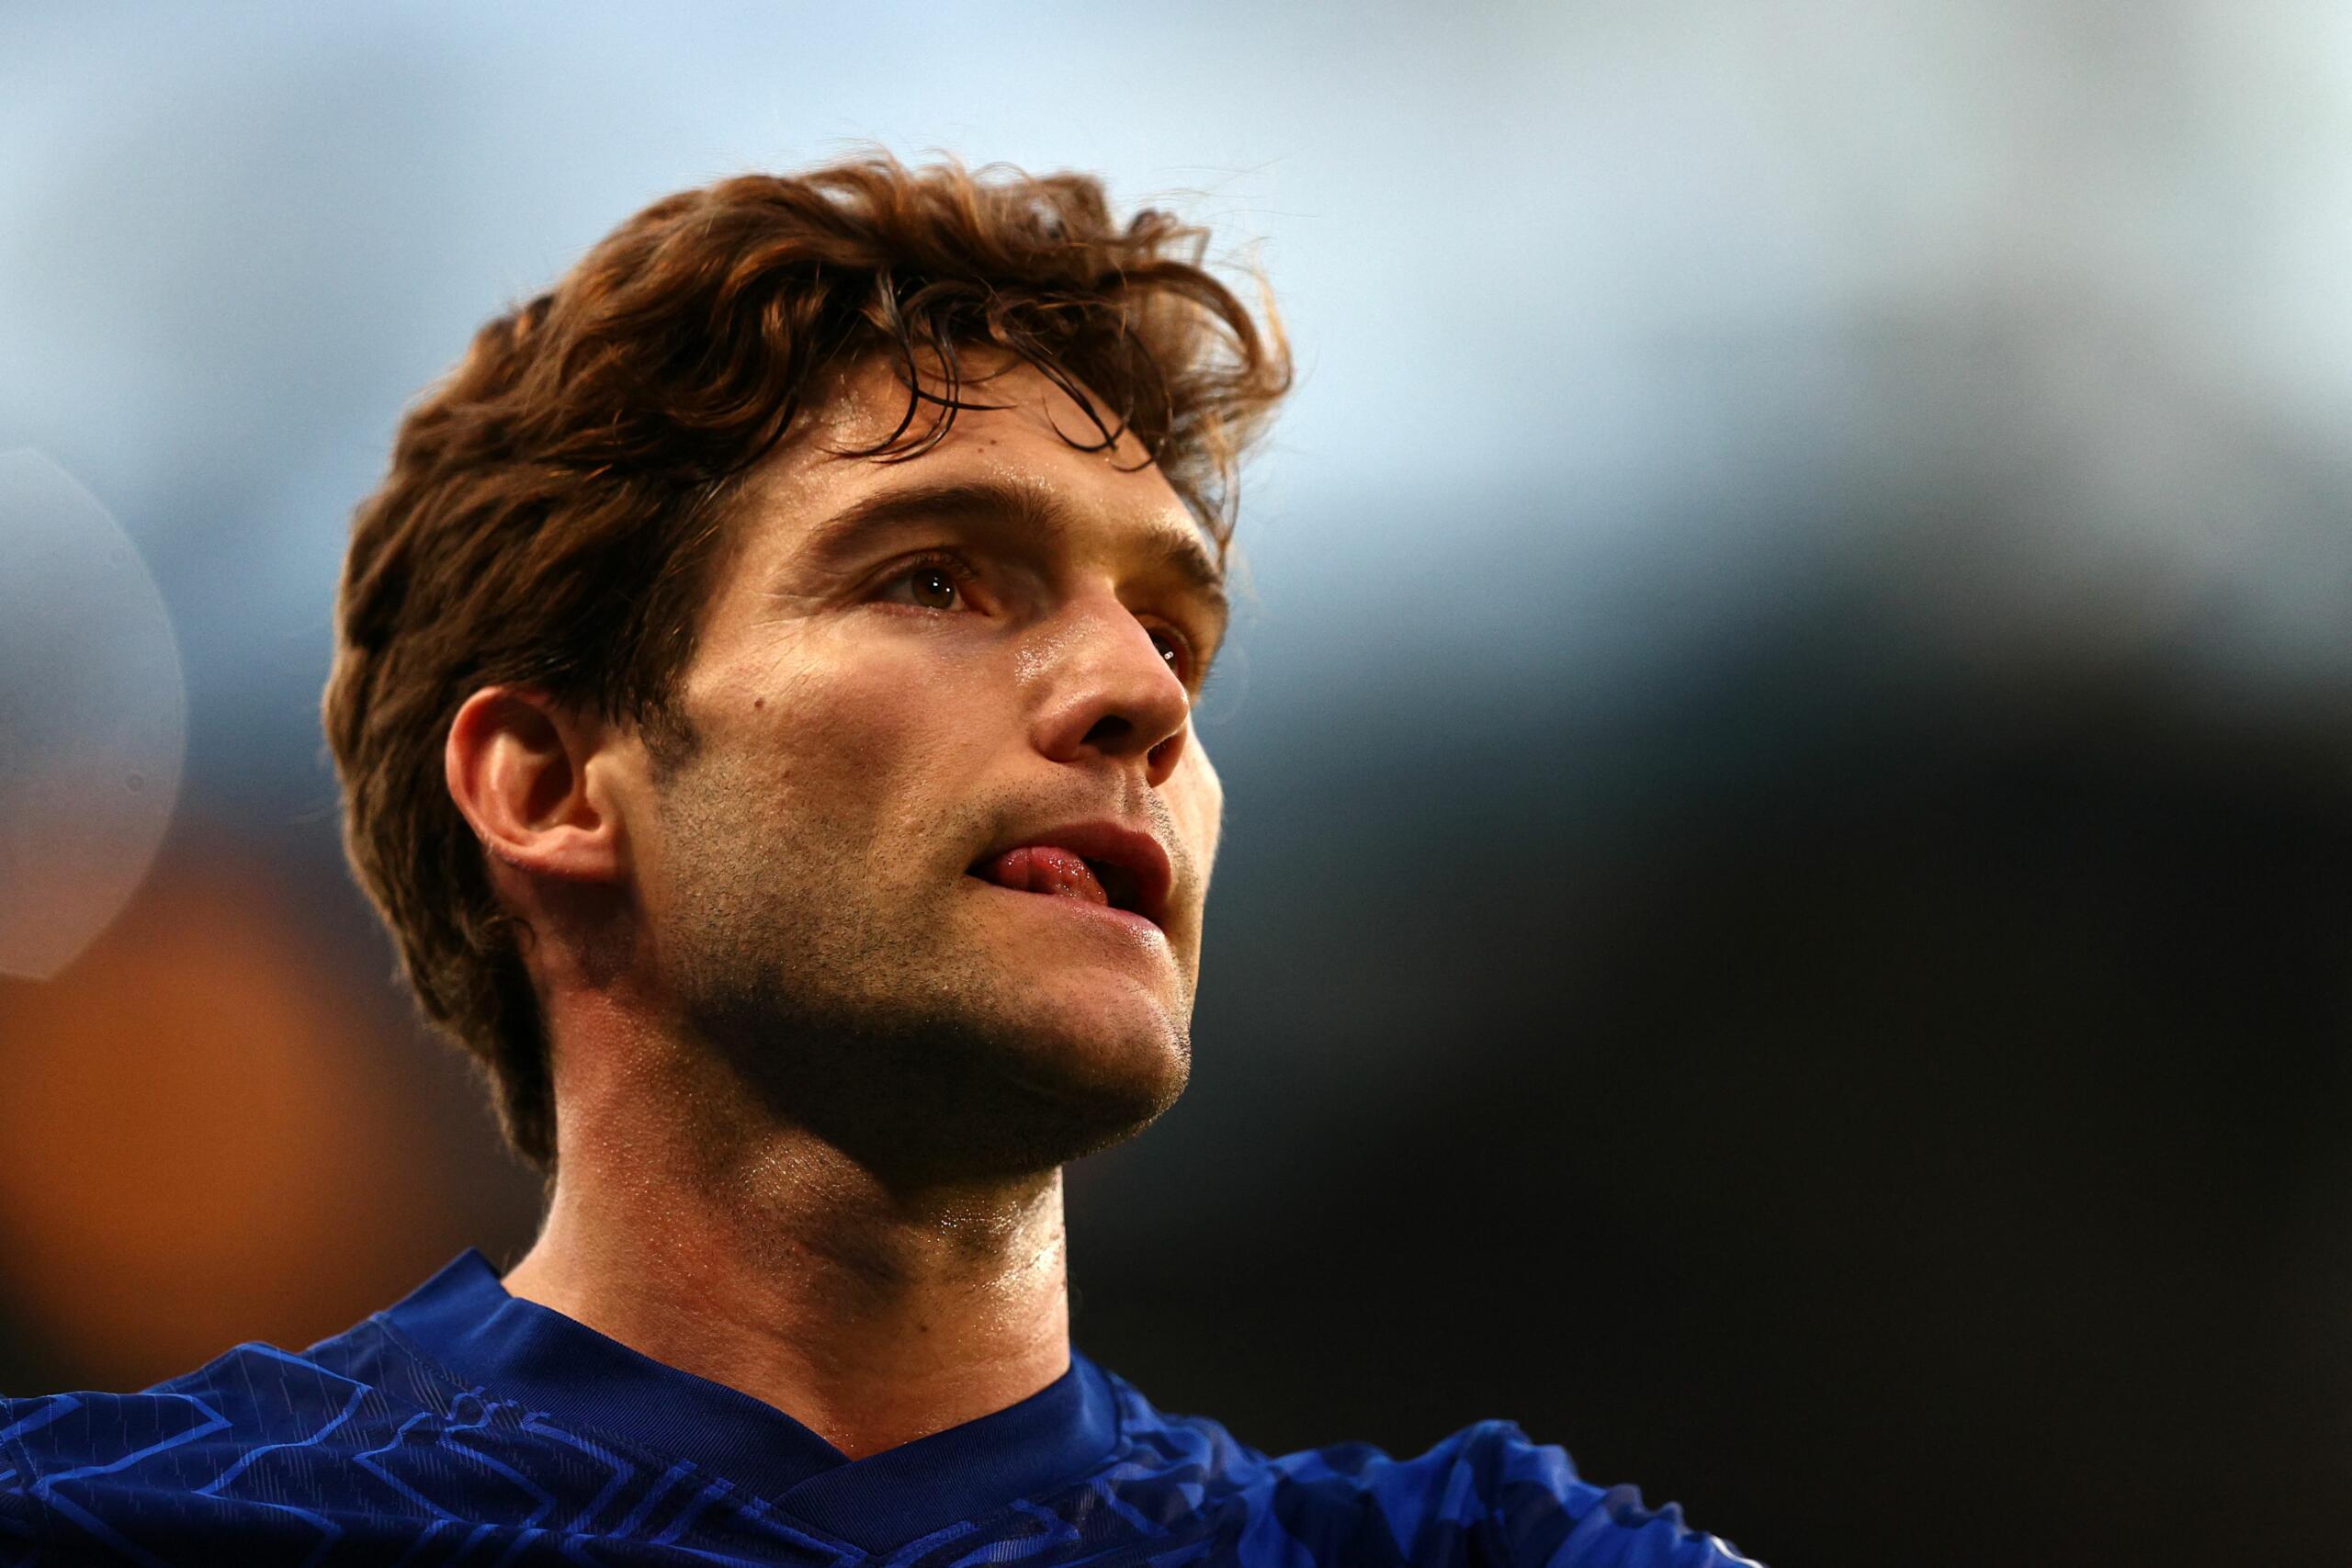 Inter Marcos Alonso